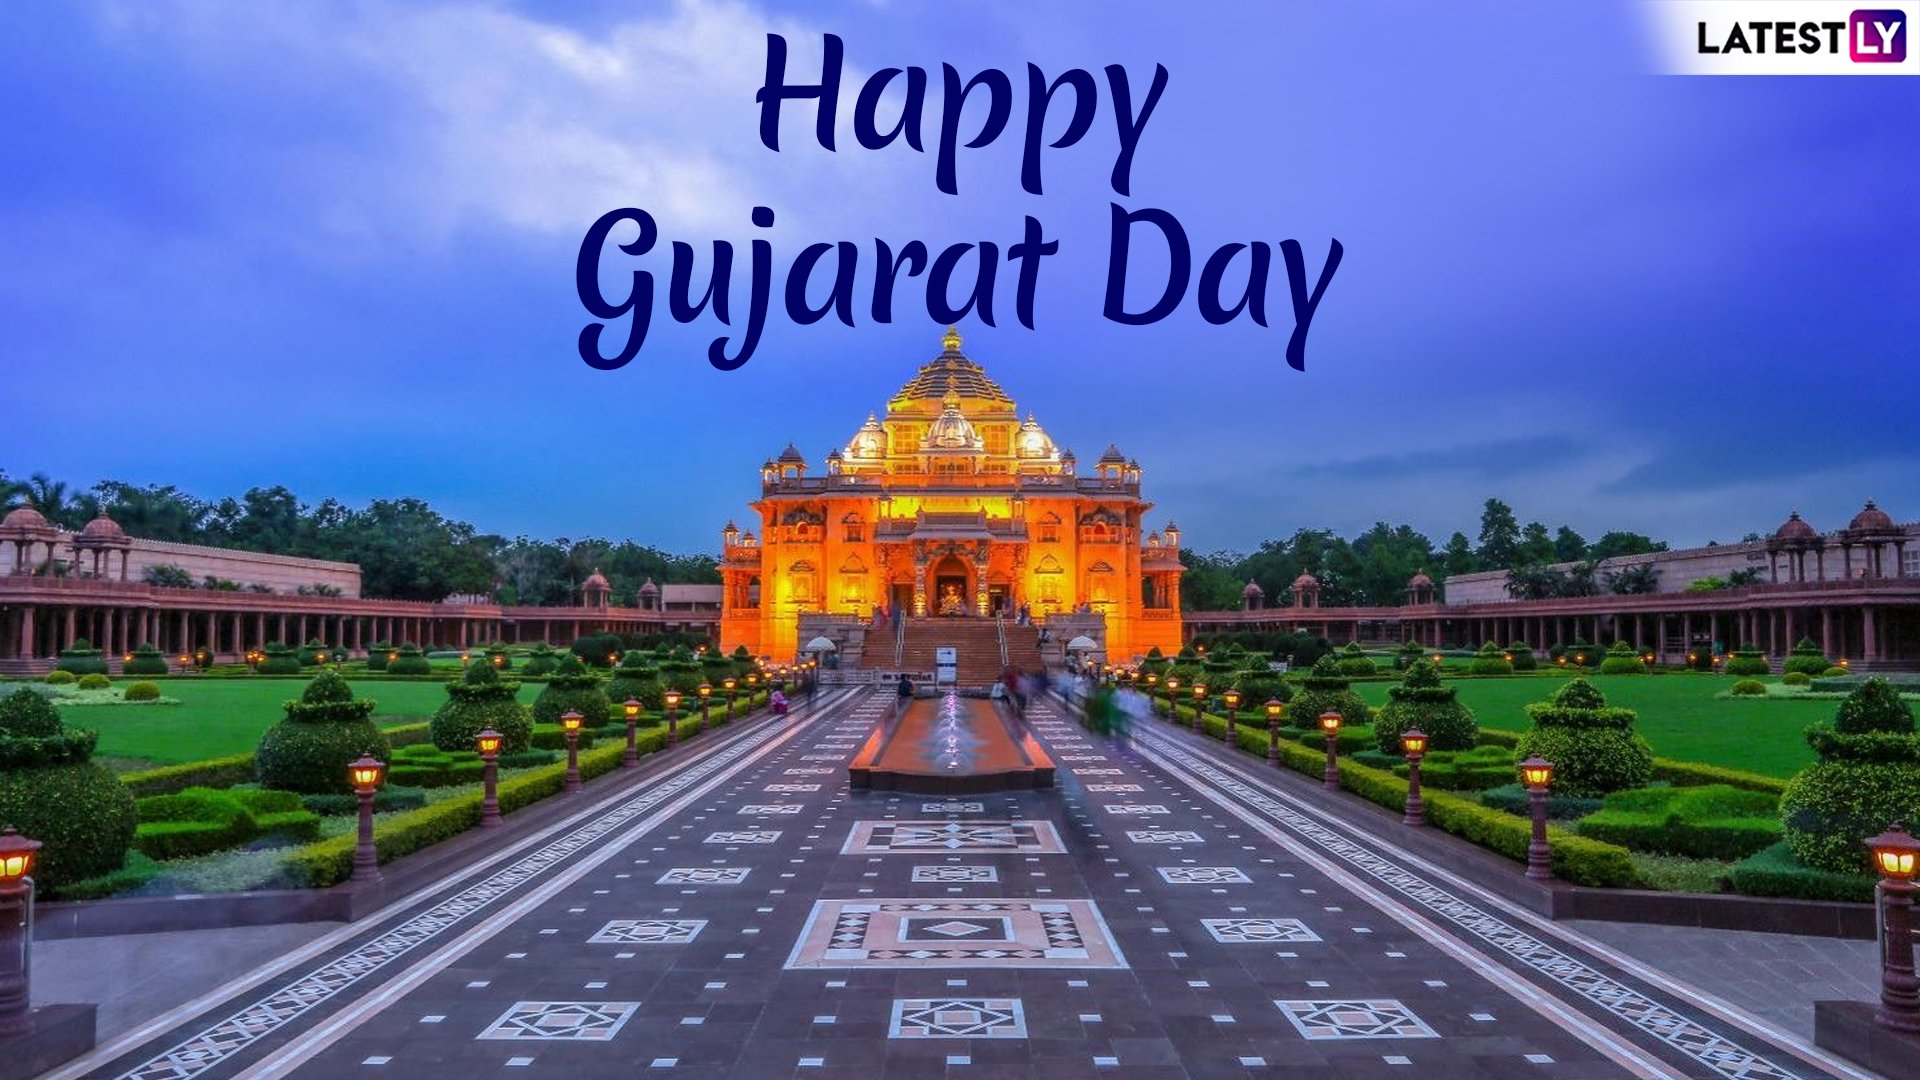 Gujarat Day Image With Quotes for Free Download Online